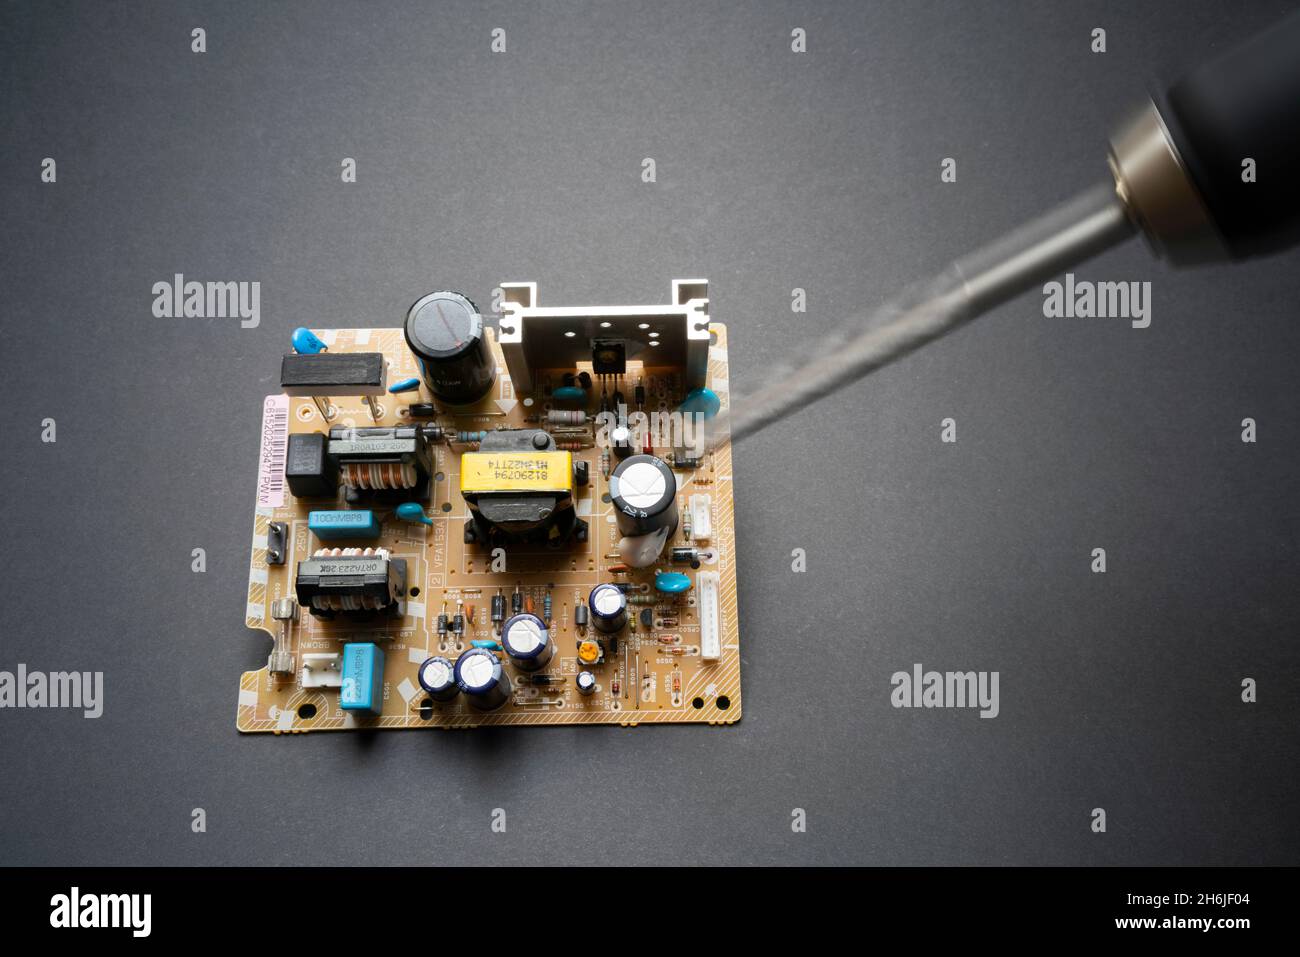 Drill hovering over electric component circuit board suggesting botched repairs or sabotage or hacking Stock Photo